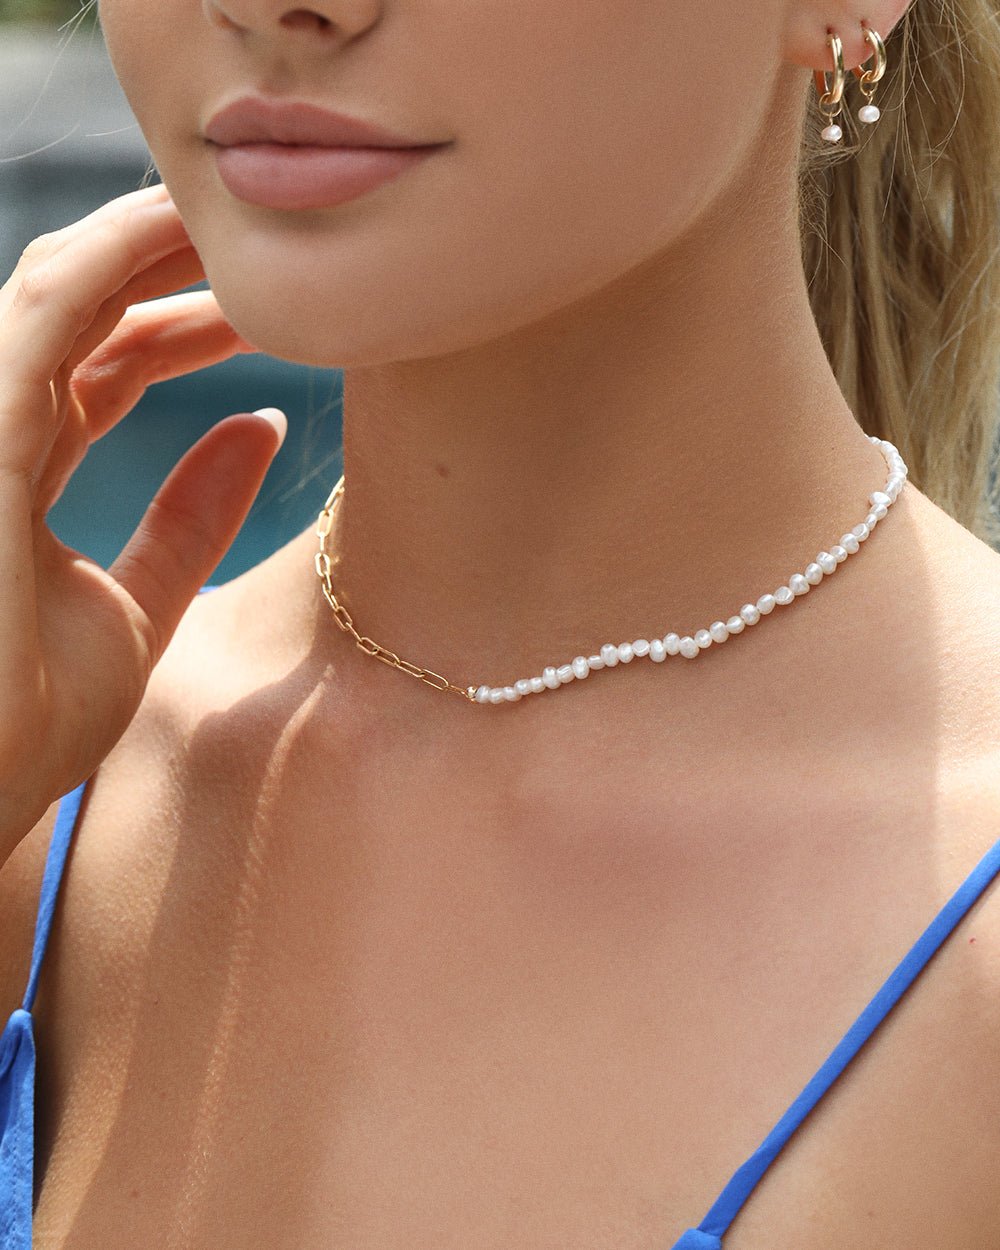 Buy Half Pearl Half Chain much Love Necklace Online in India - Etsy